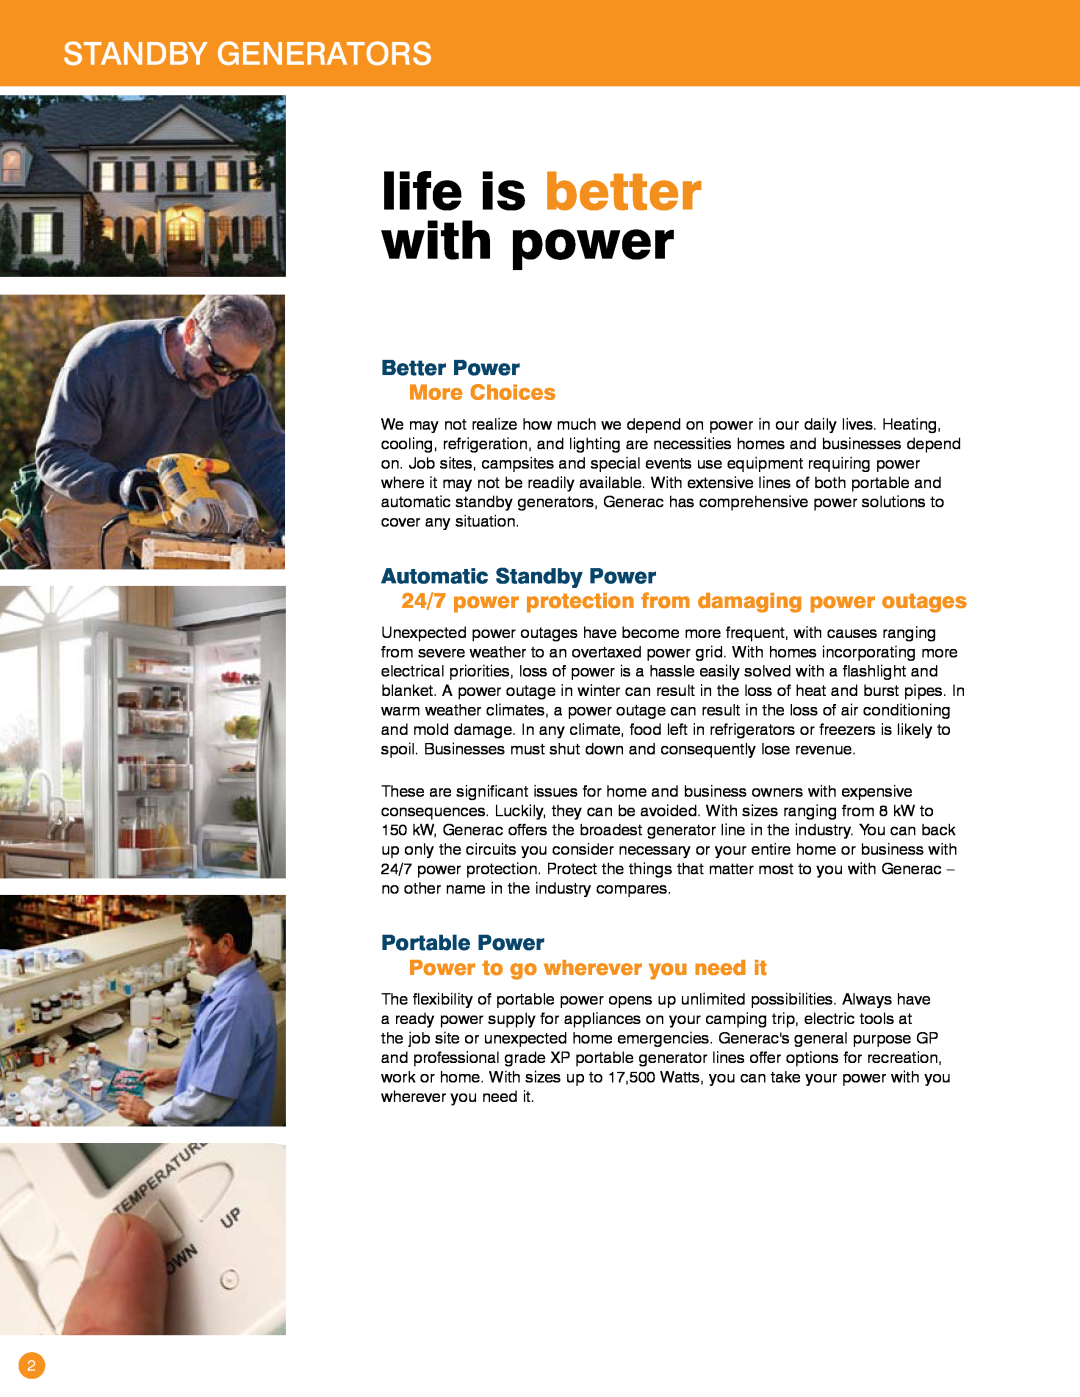 Generac Power Systems Transfer Switches and Accessories Standby Generators, More Choices, Power to go wherever you need it 